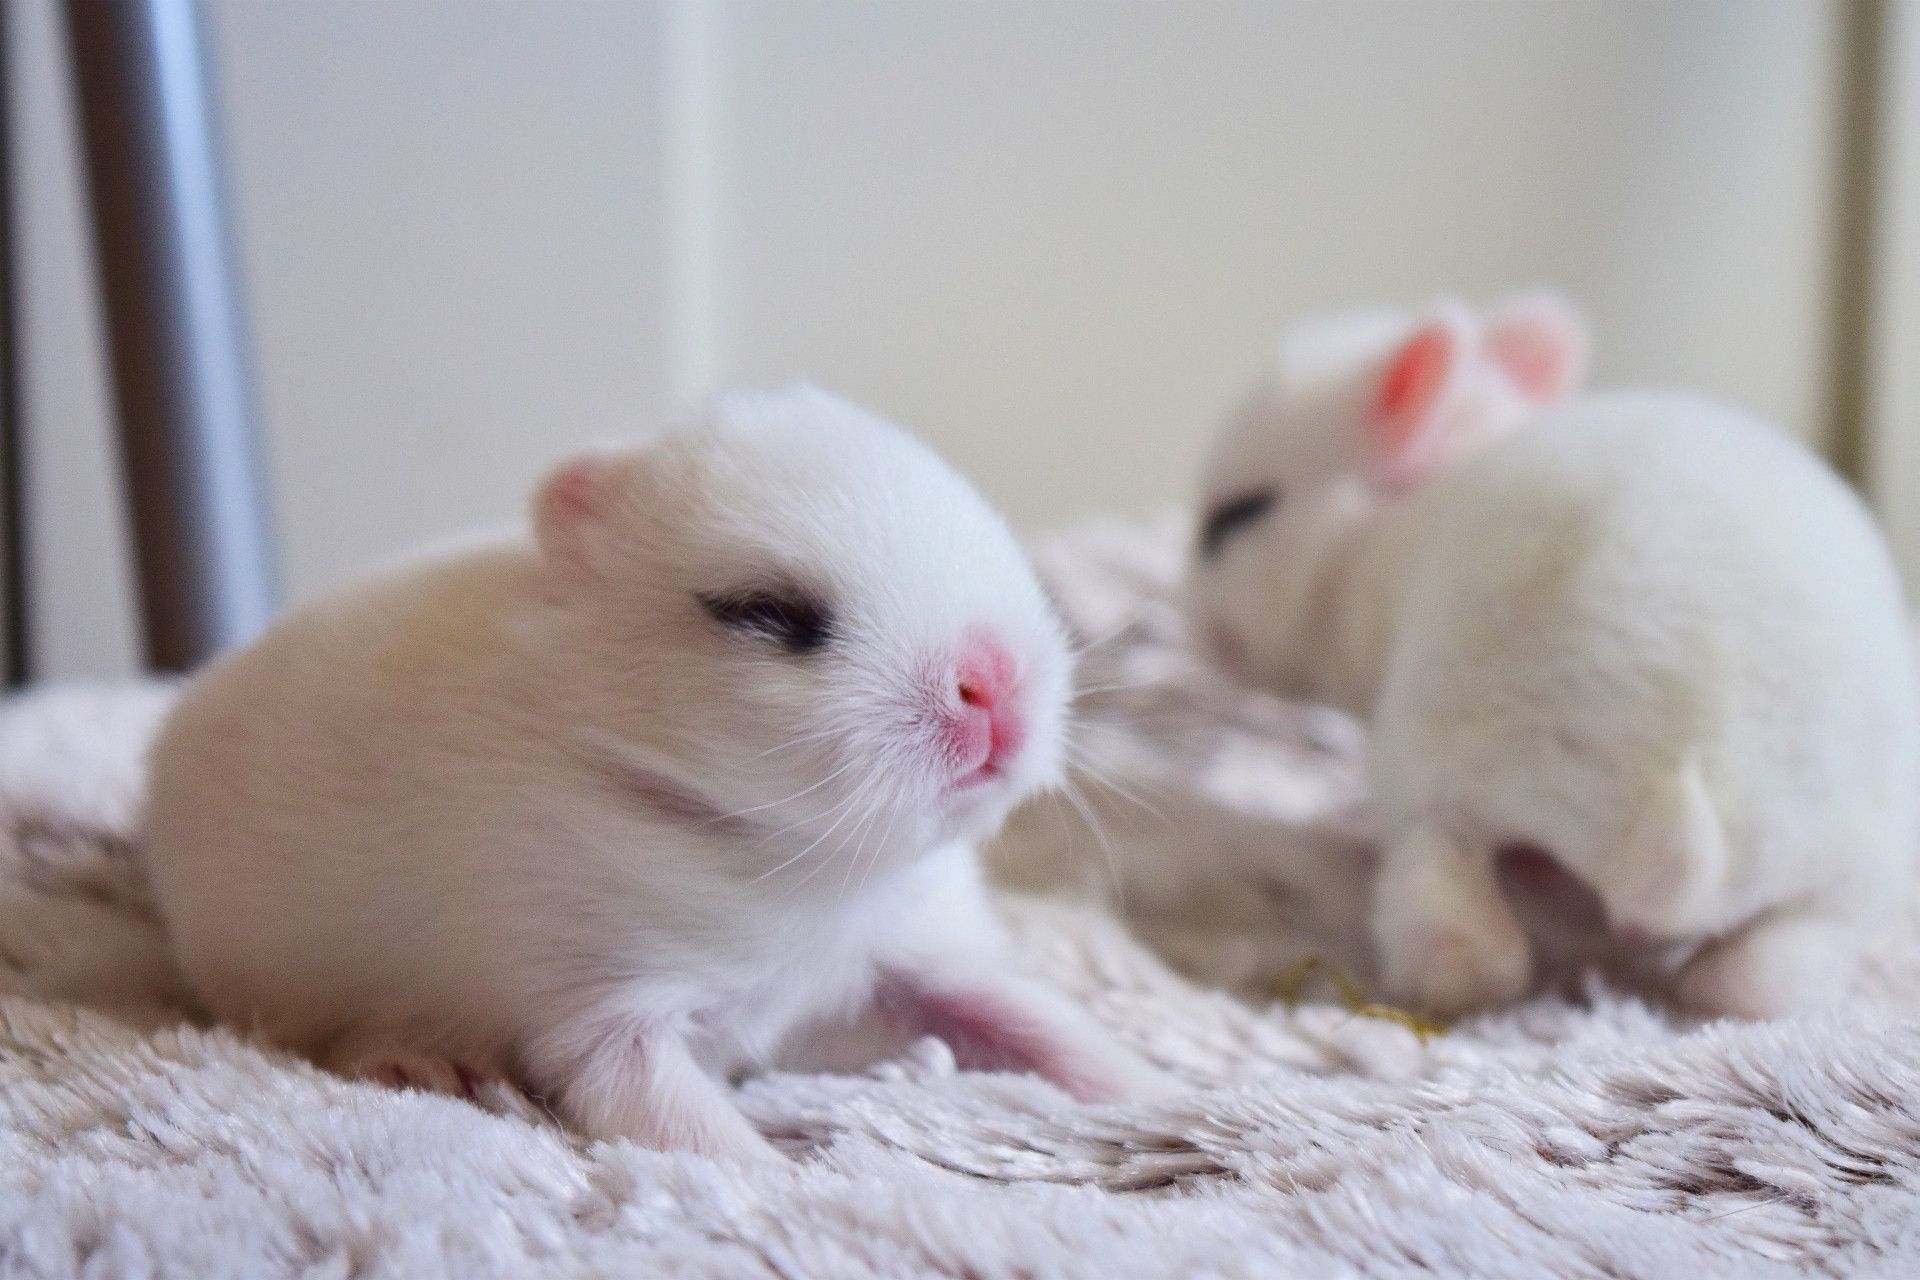 How old are baby rabbits when they open their eyes?